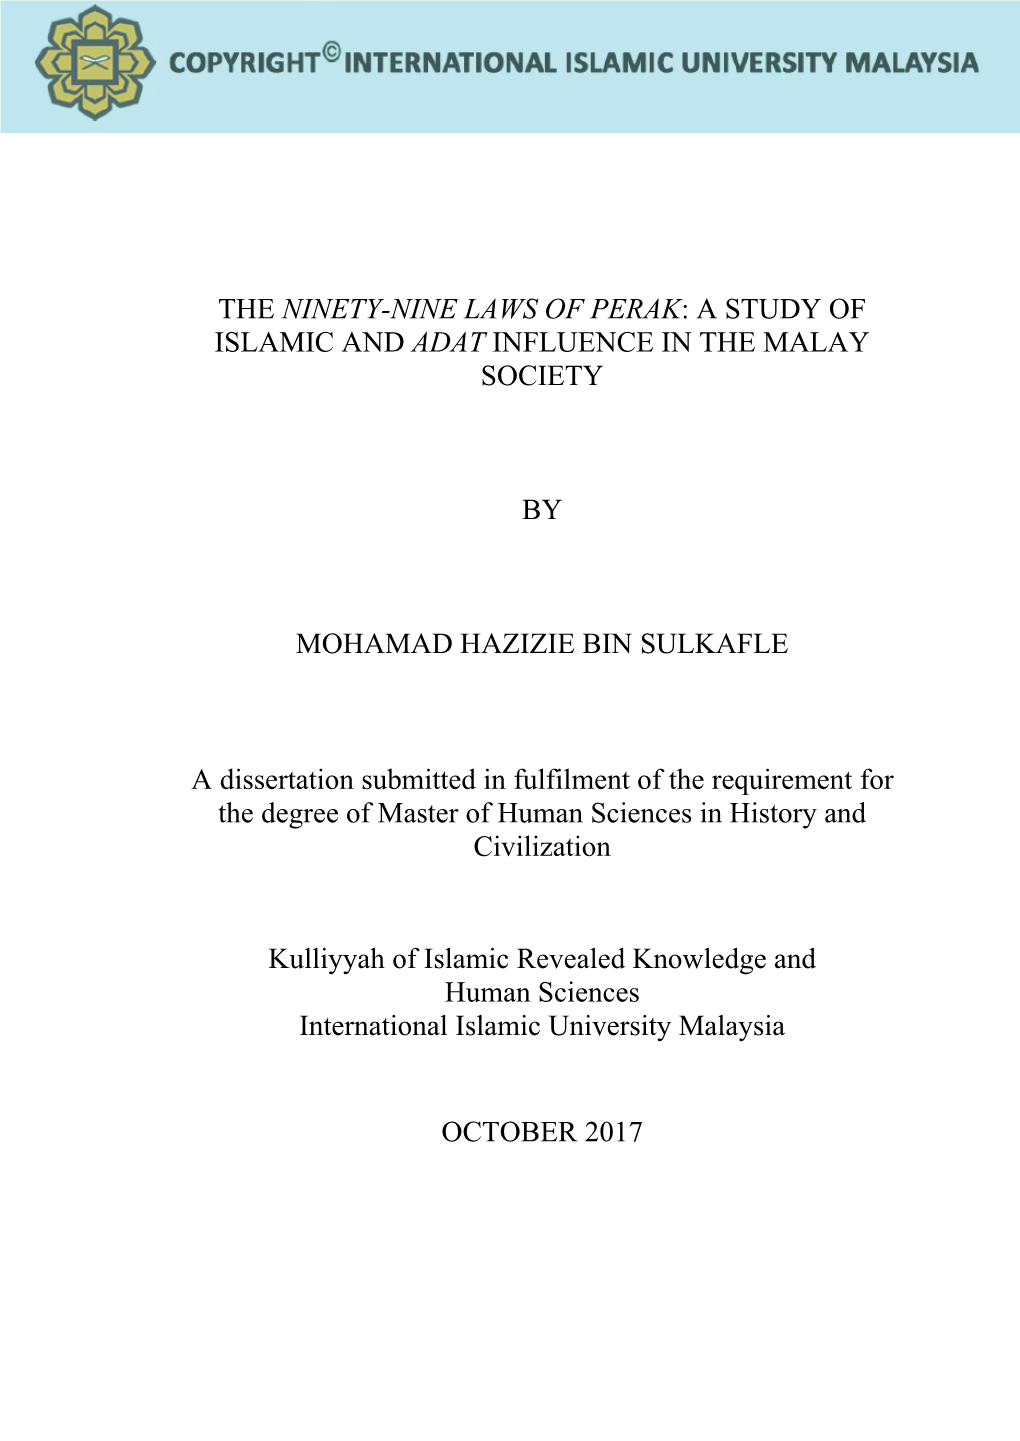 The Ninety-Nine Laws of Perak: a Study of Islamic and Adat Influence in the Malay Society